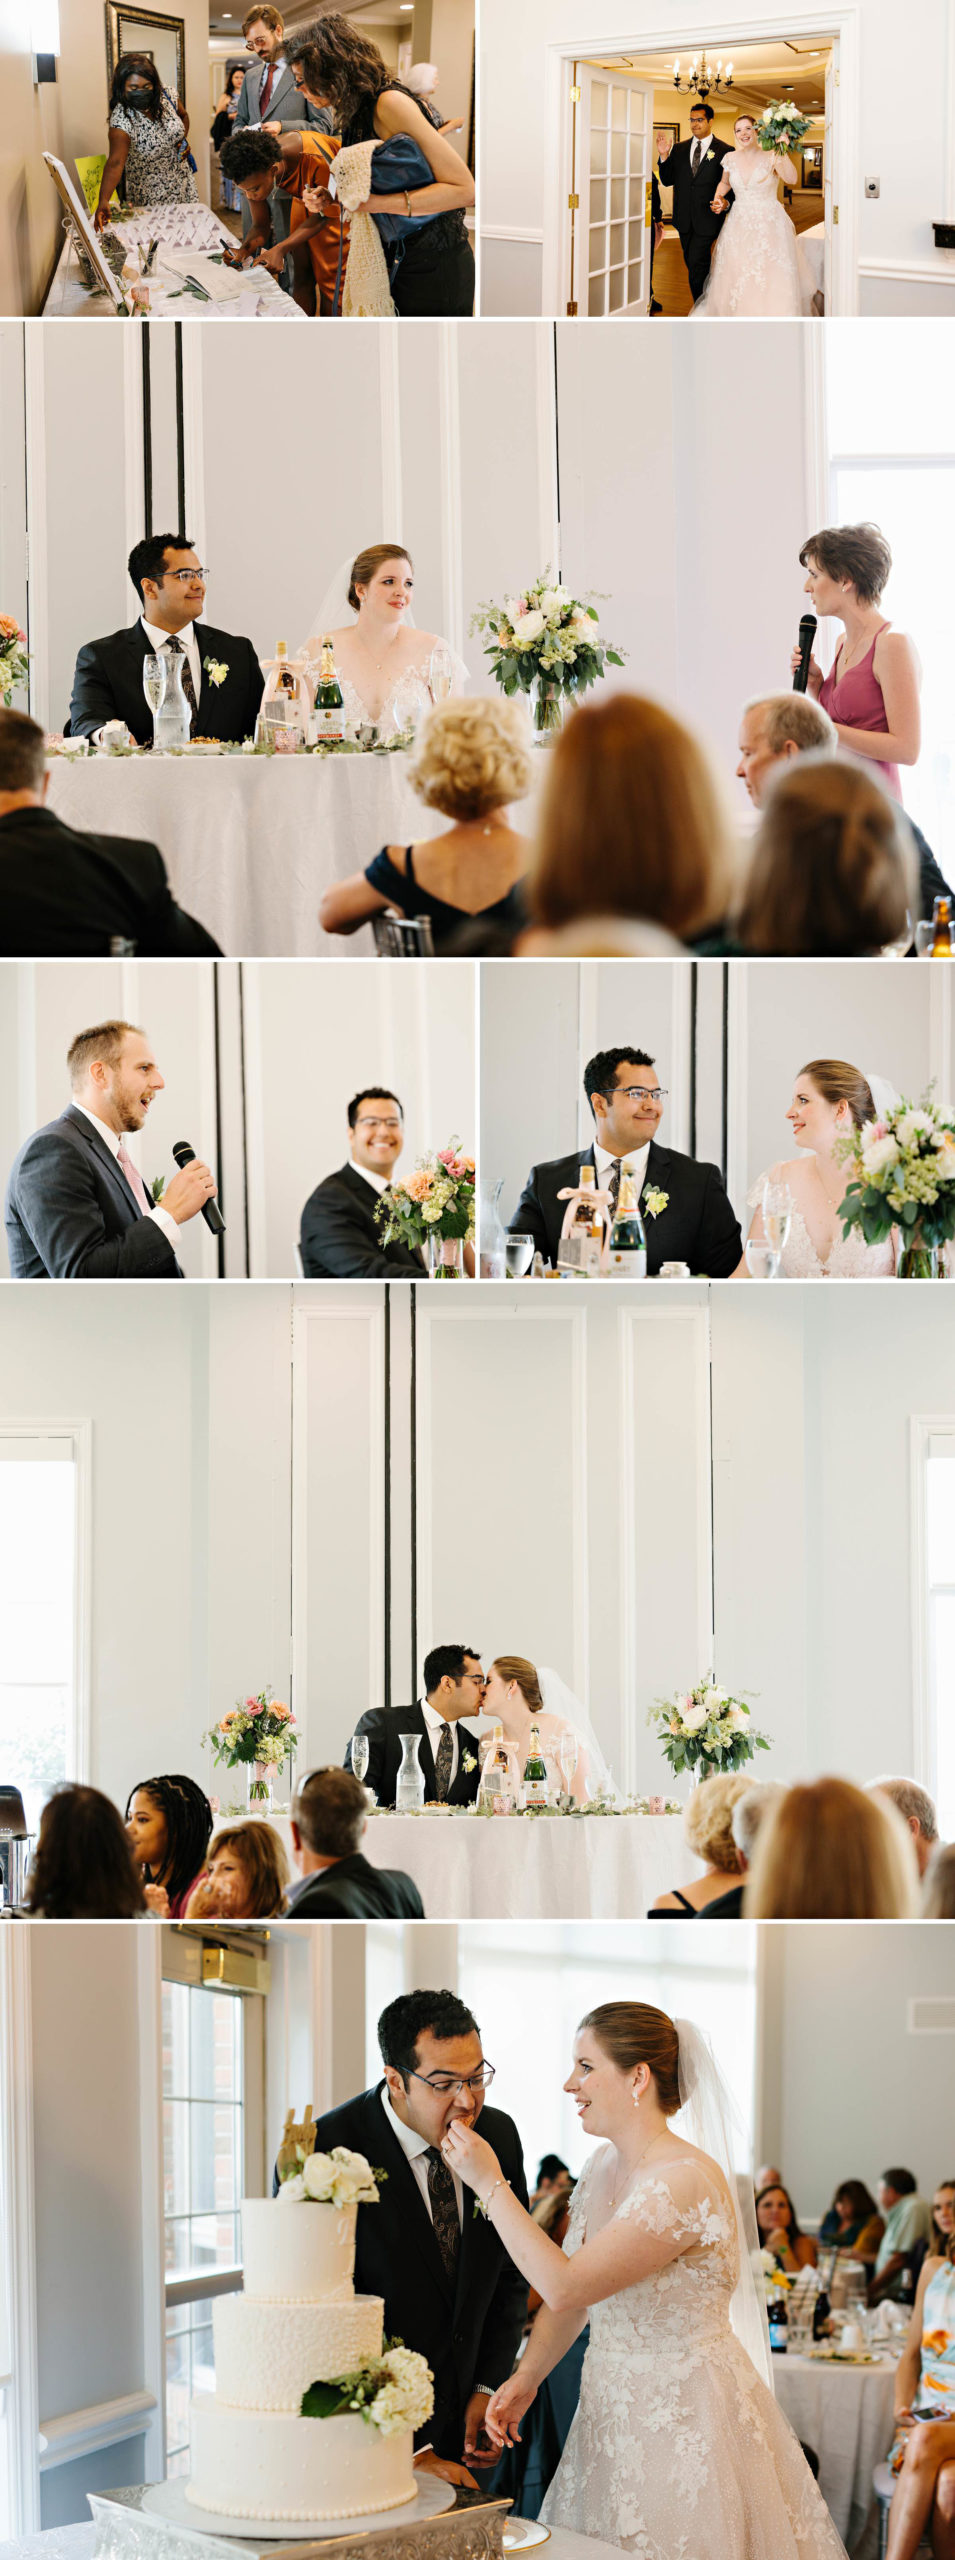 Guests sign the guest book; bride and groom make their first entrance as a married couple; bride and groom watches a wedding toast; bride and groom kiss; bride feeds cake to groom at the Grosse Ile Country Club by Detroit Wedding Photographer Michele Maloney